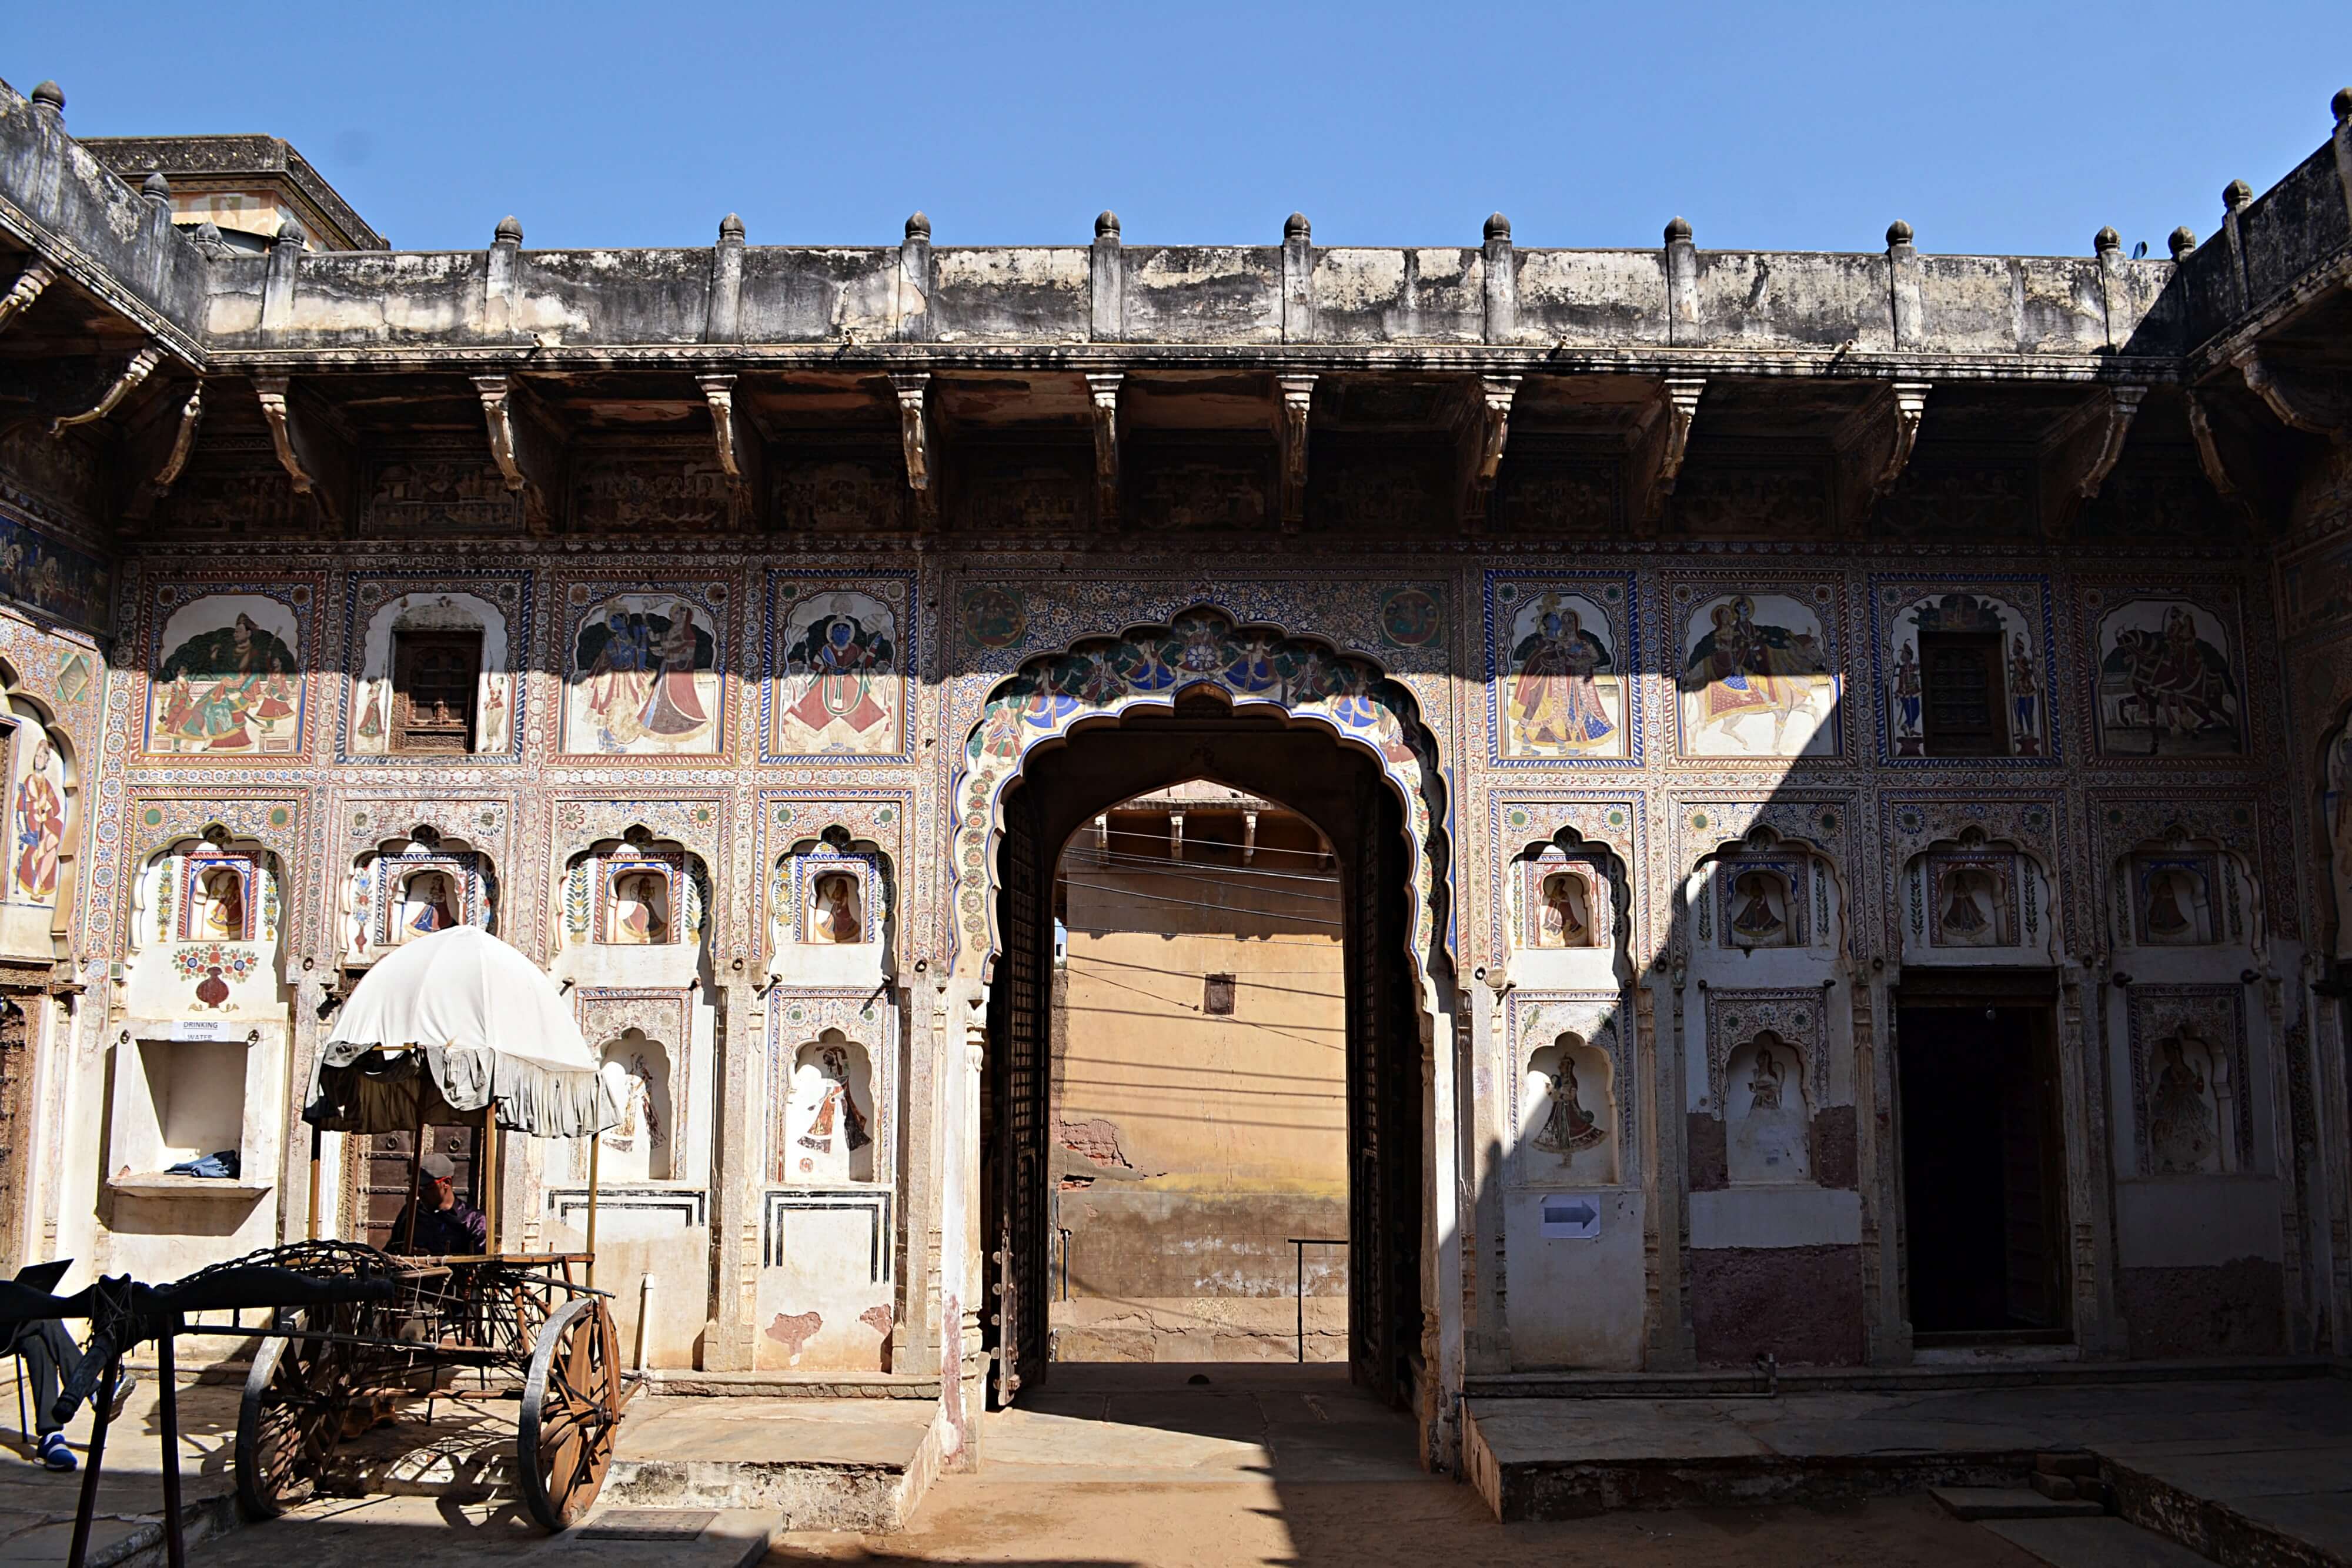 A walk through Nawalgarh’s streets is a chance to lose yourself in the faded splendor of the 18th century, when wealthy merchants built havelis like this one — Uttara Morarka Haveli — all over the town.